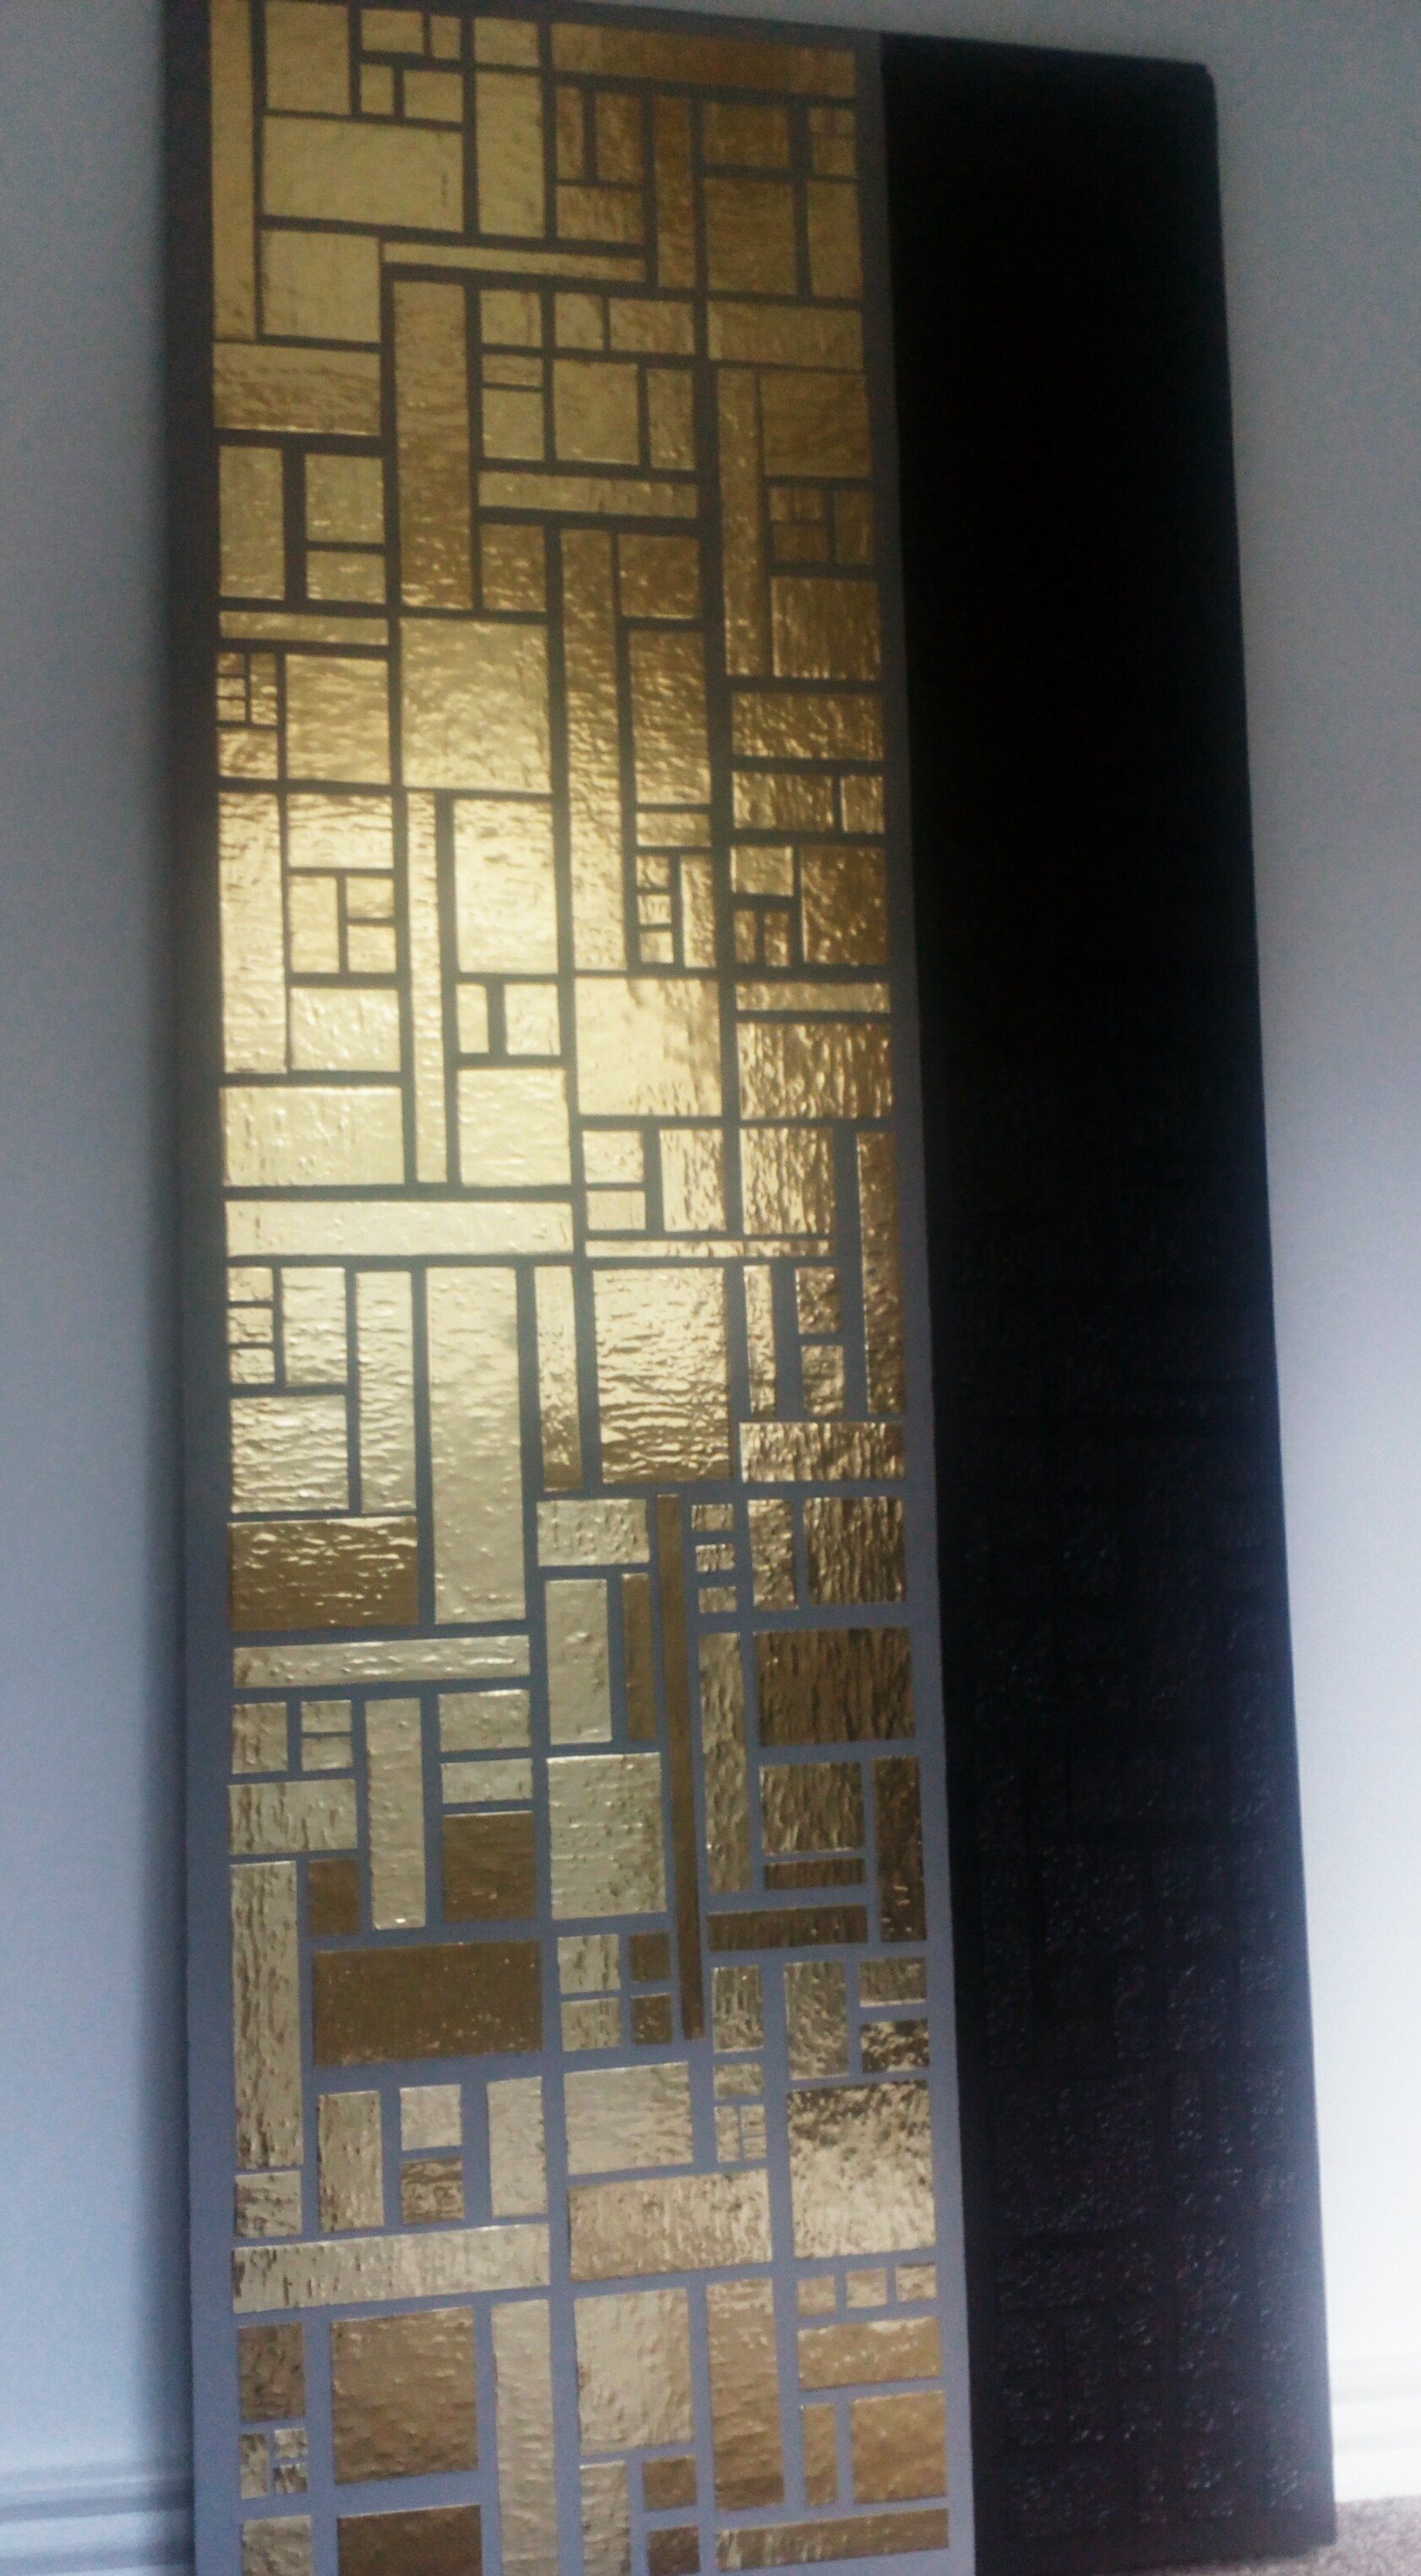 140 X 60 x 3 cm
Hammered gold & textured paper on wood